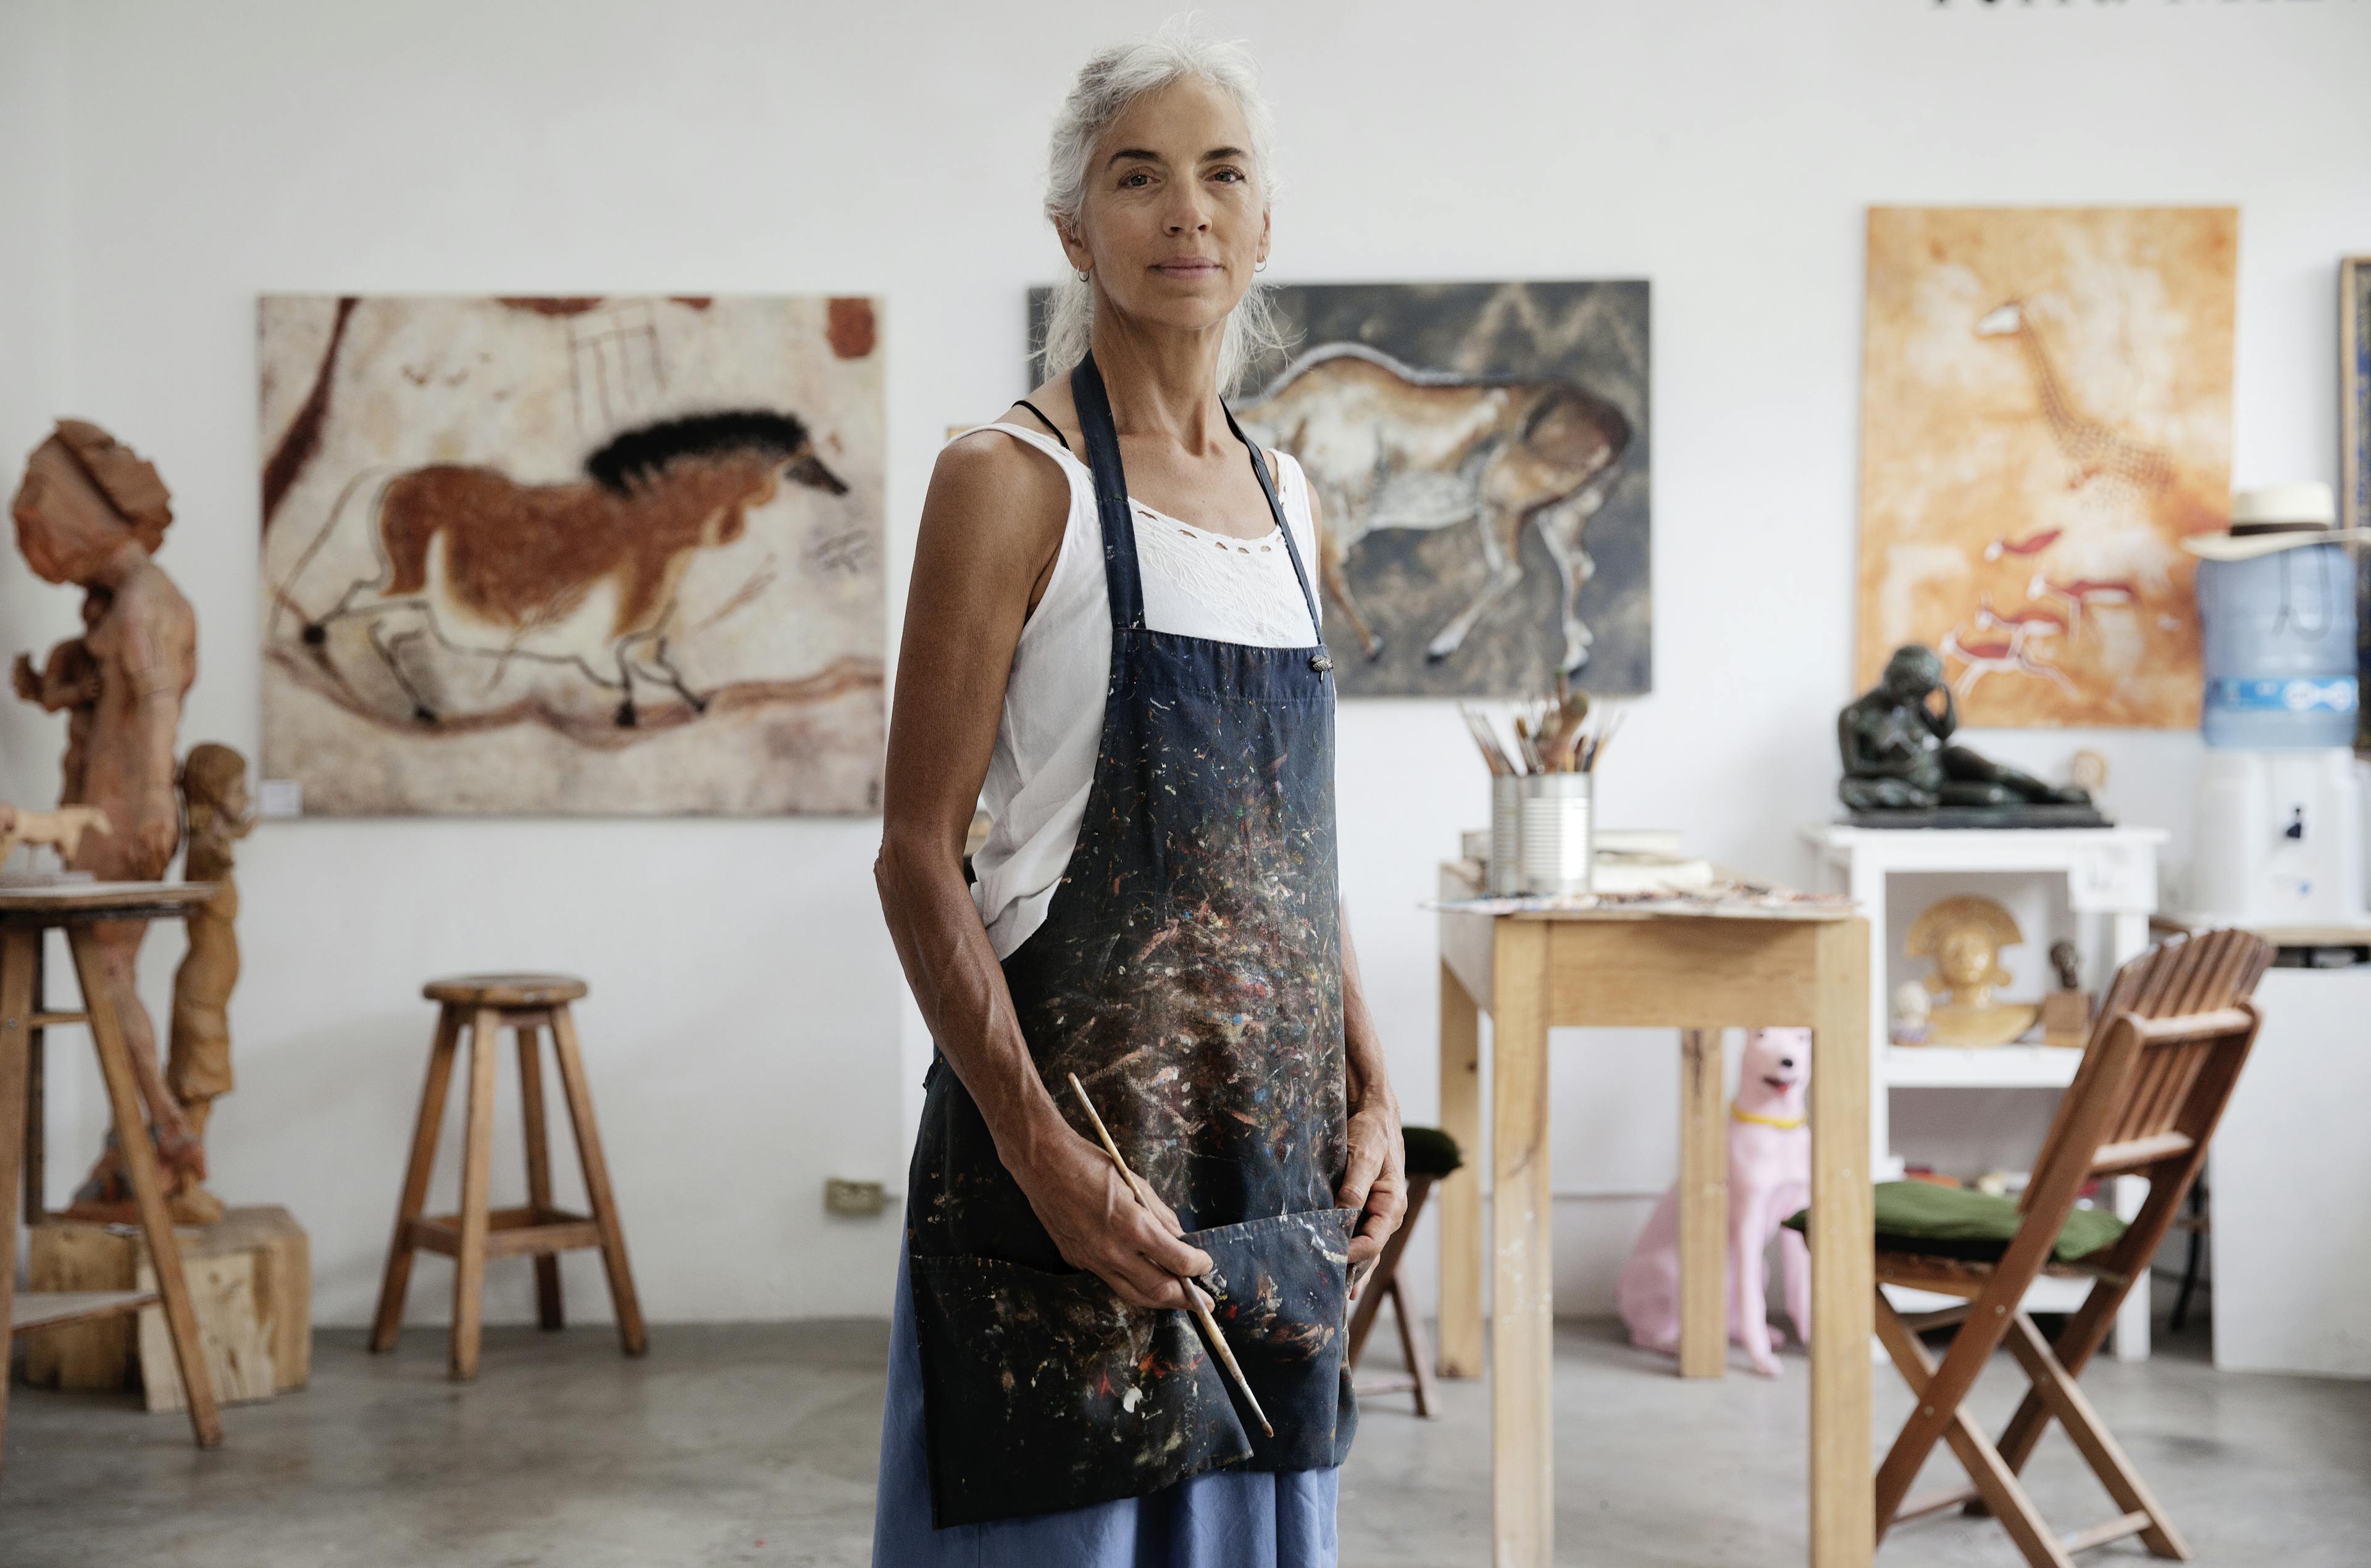 Illustrative picture for the article A great retirement stats with a plan. Picture: A art painter woman standing